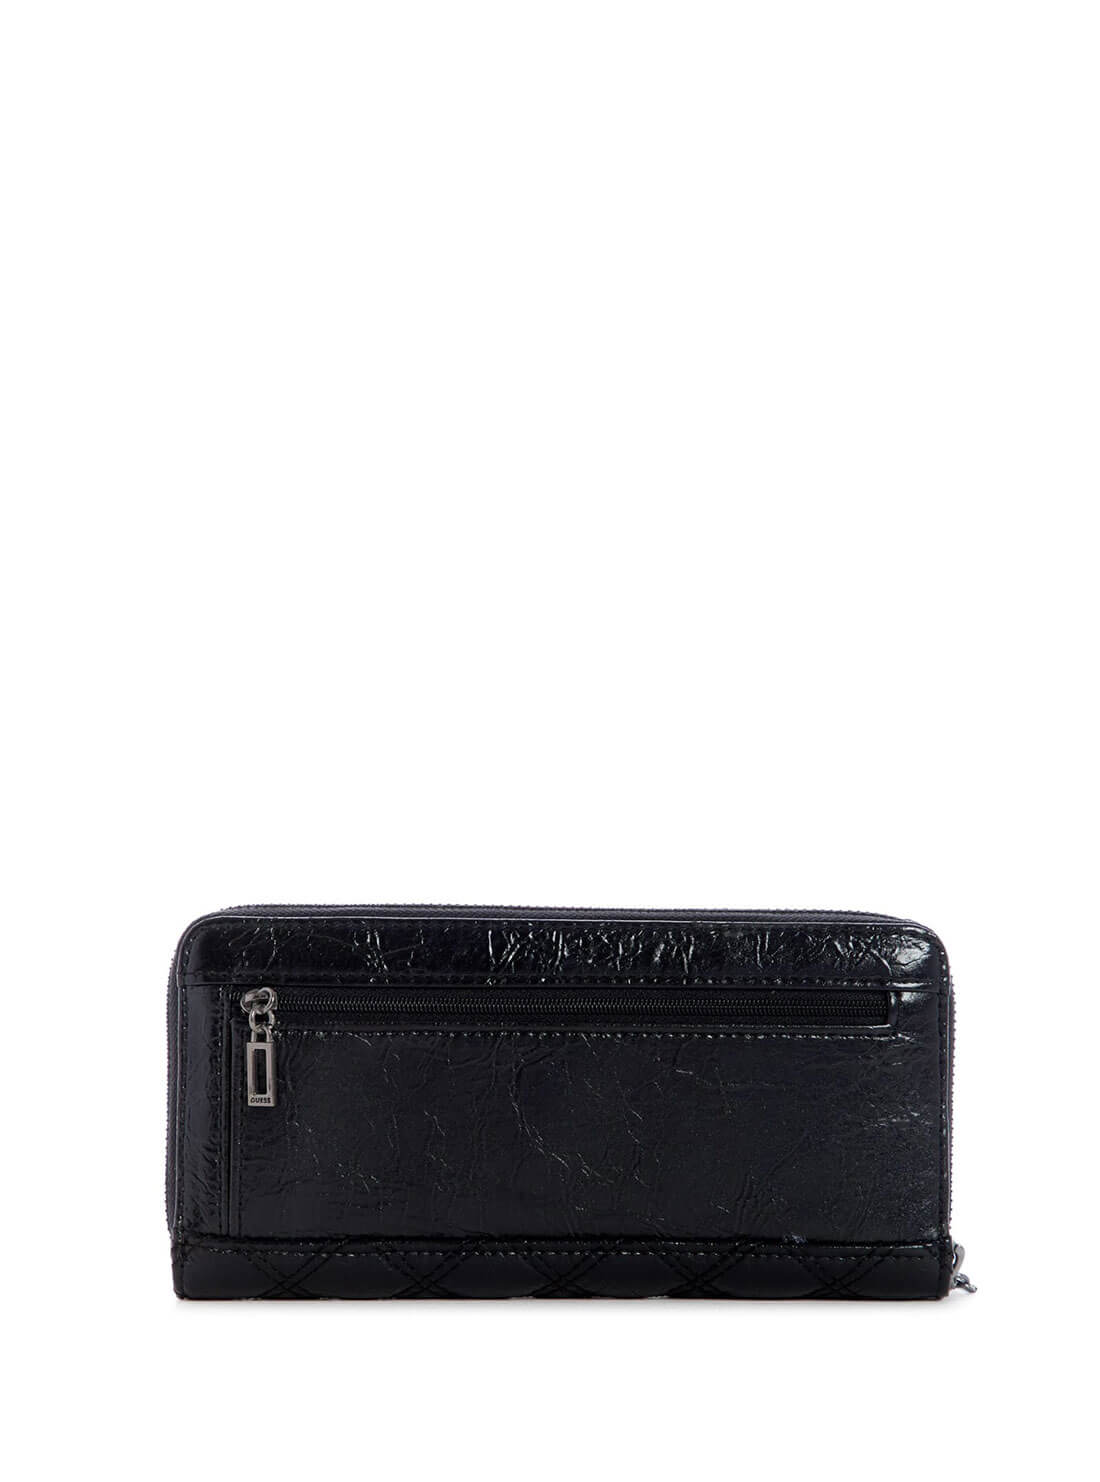 guess Patent Black Cessily Large Womens Wallet back view